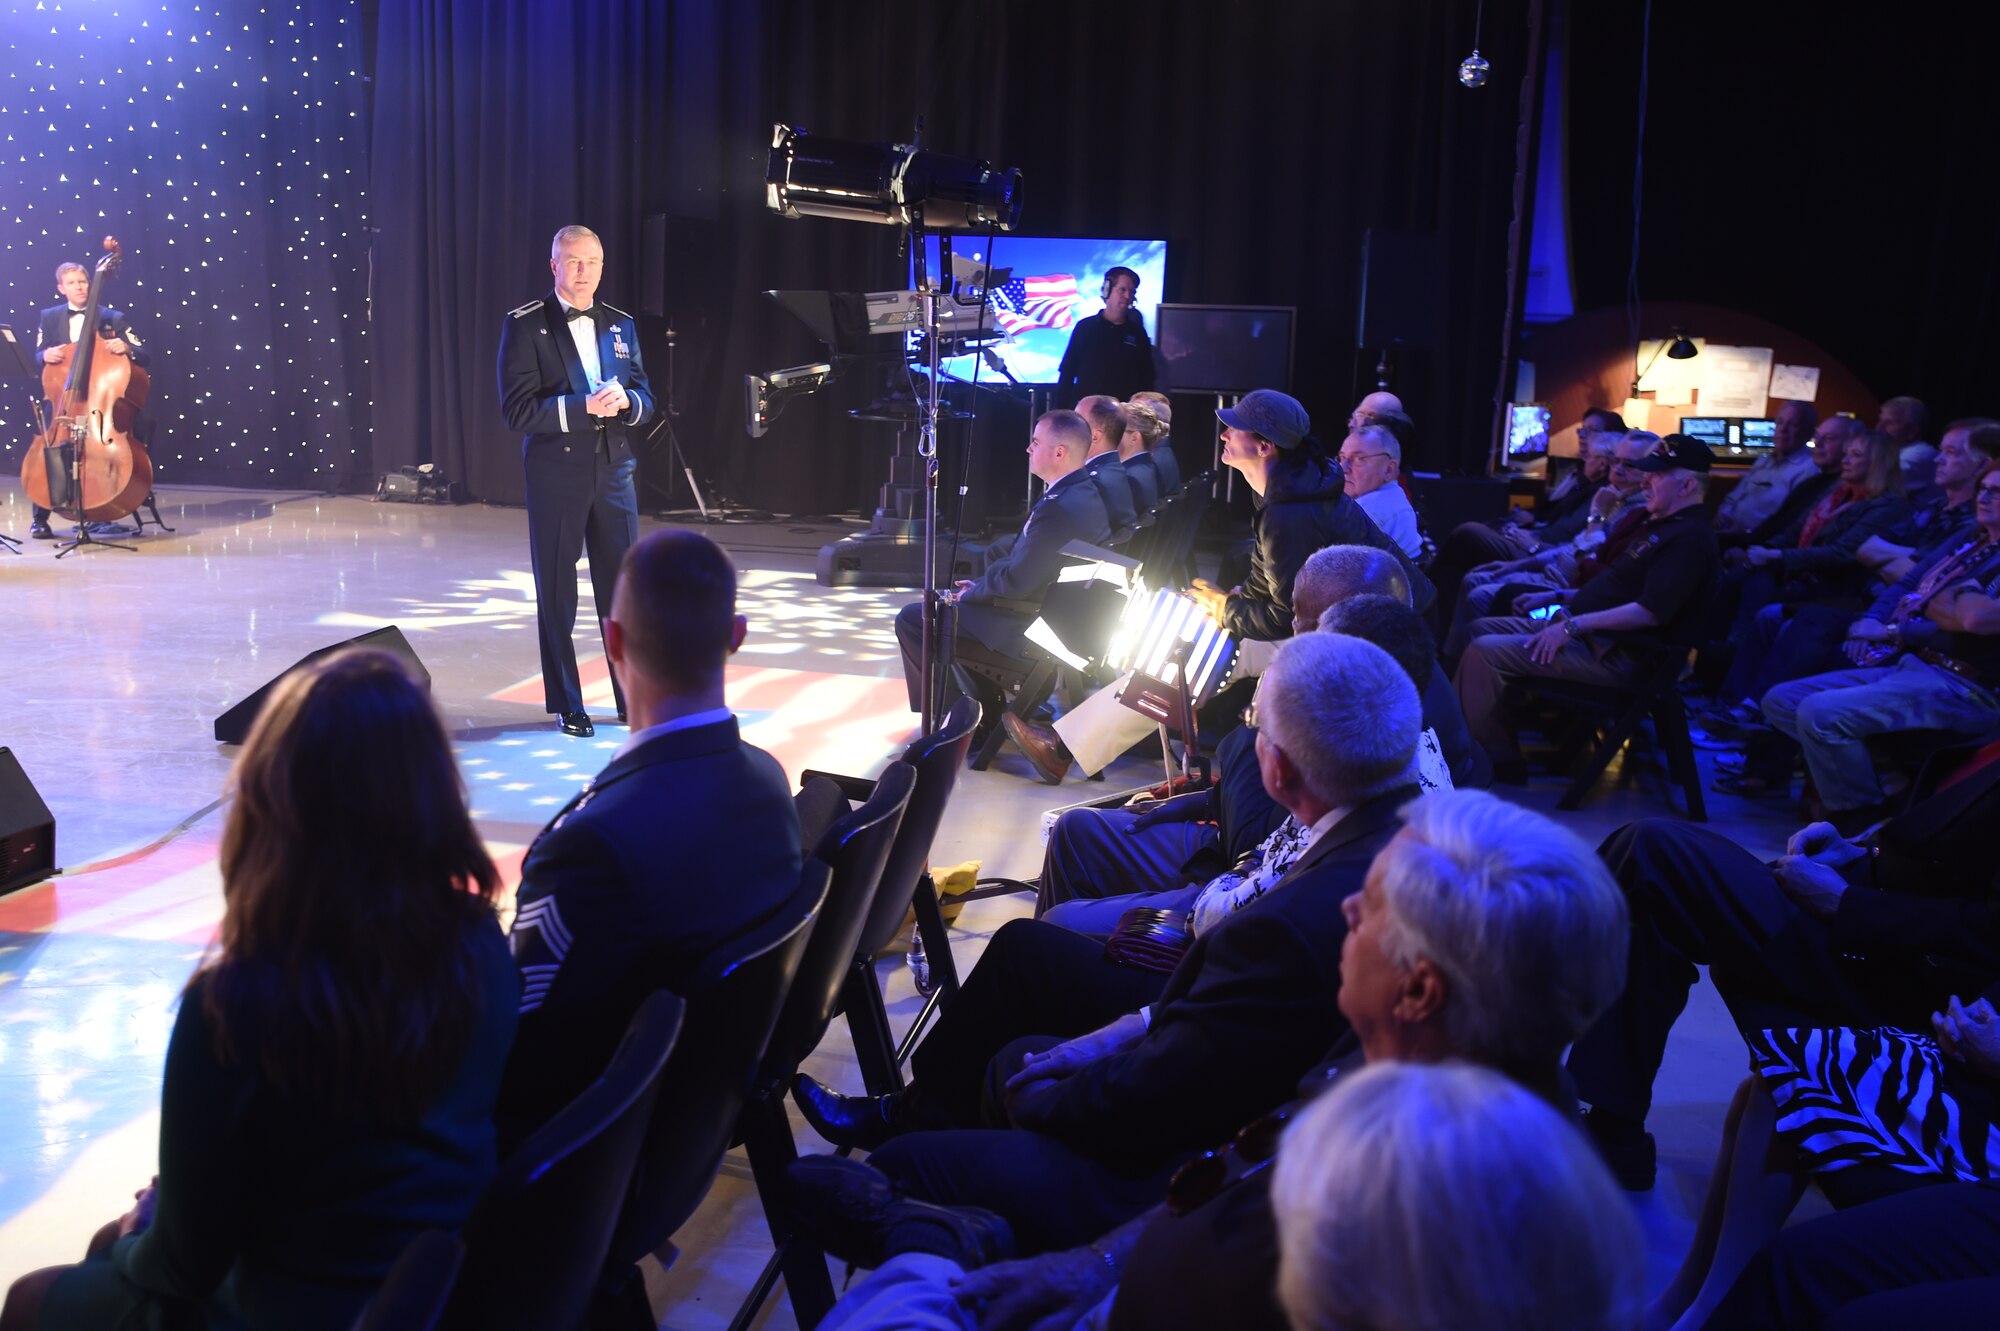 Col. Larry Lang, U.S. Air Force Band commander and conductor, speaks to the audience at the Maryland Public Television studio before a live recording of the band performing their Veteran’s Day tribute compositions in Owings Mills, MD., Nov. 06, 2015. The tribute particularly recognizes Vietnam veterans with music from the 60’s and 70’s. (U.S. Air Force photo/Senior Airman Joshua R. M. Dewberry)